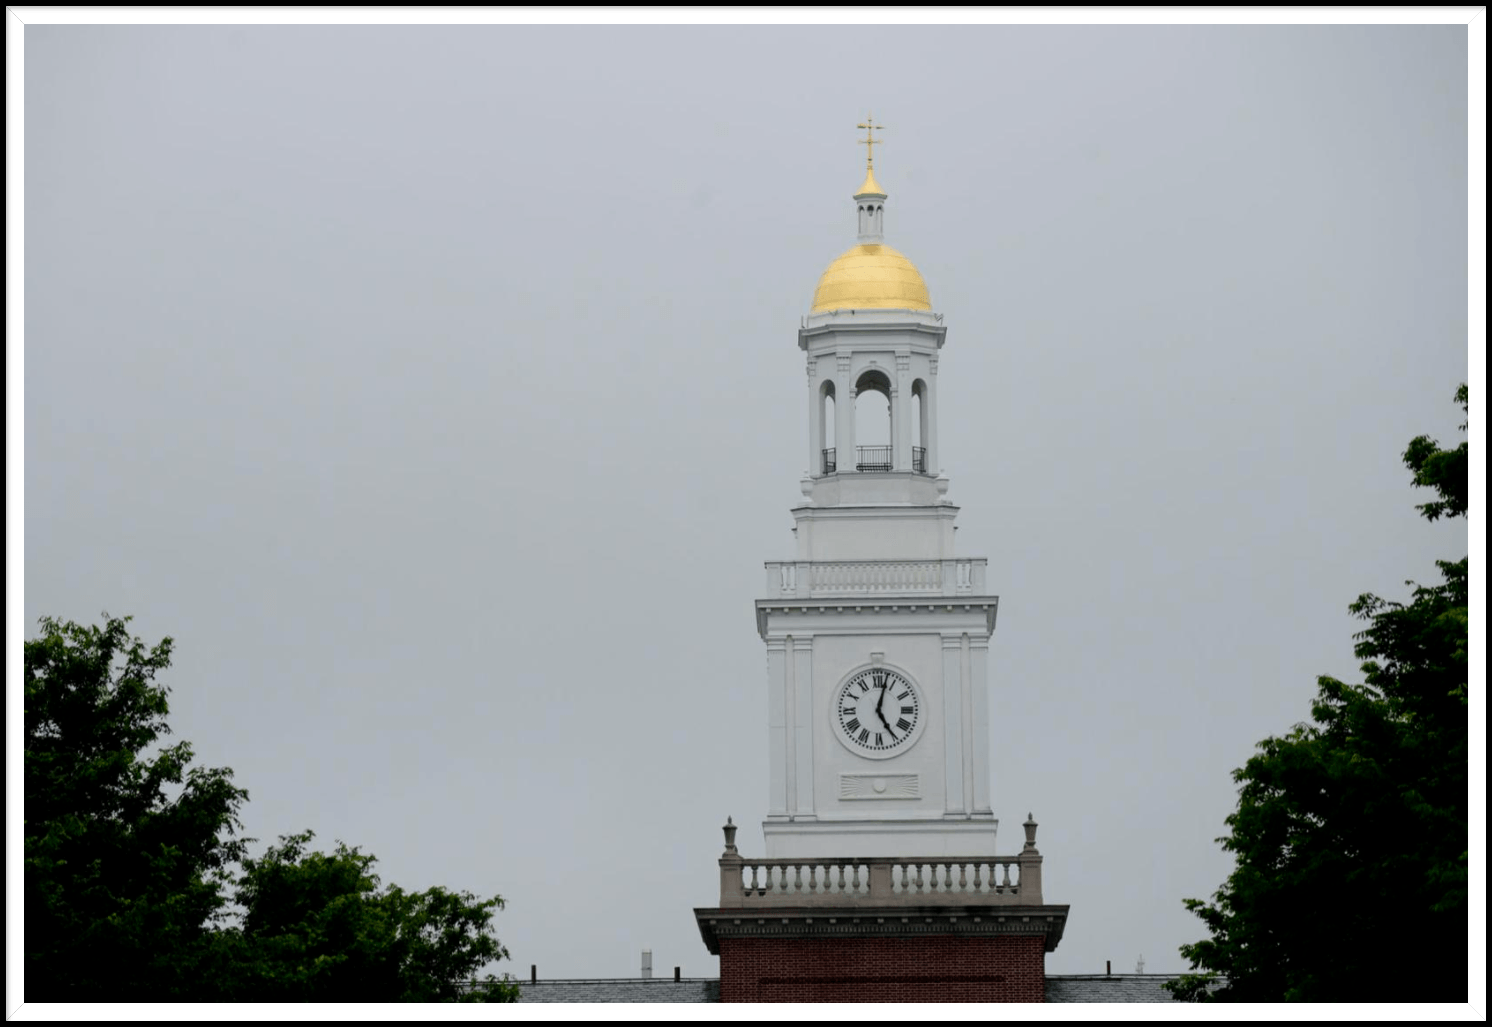 A clock tower with a gold dome on top of it